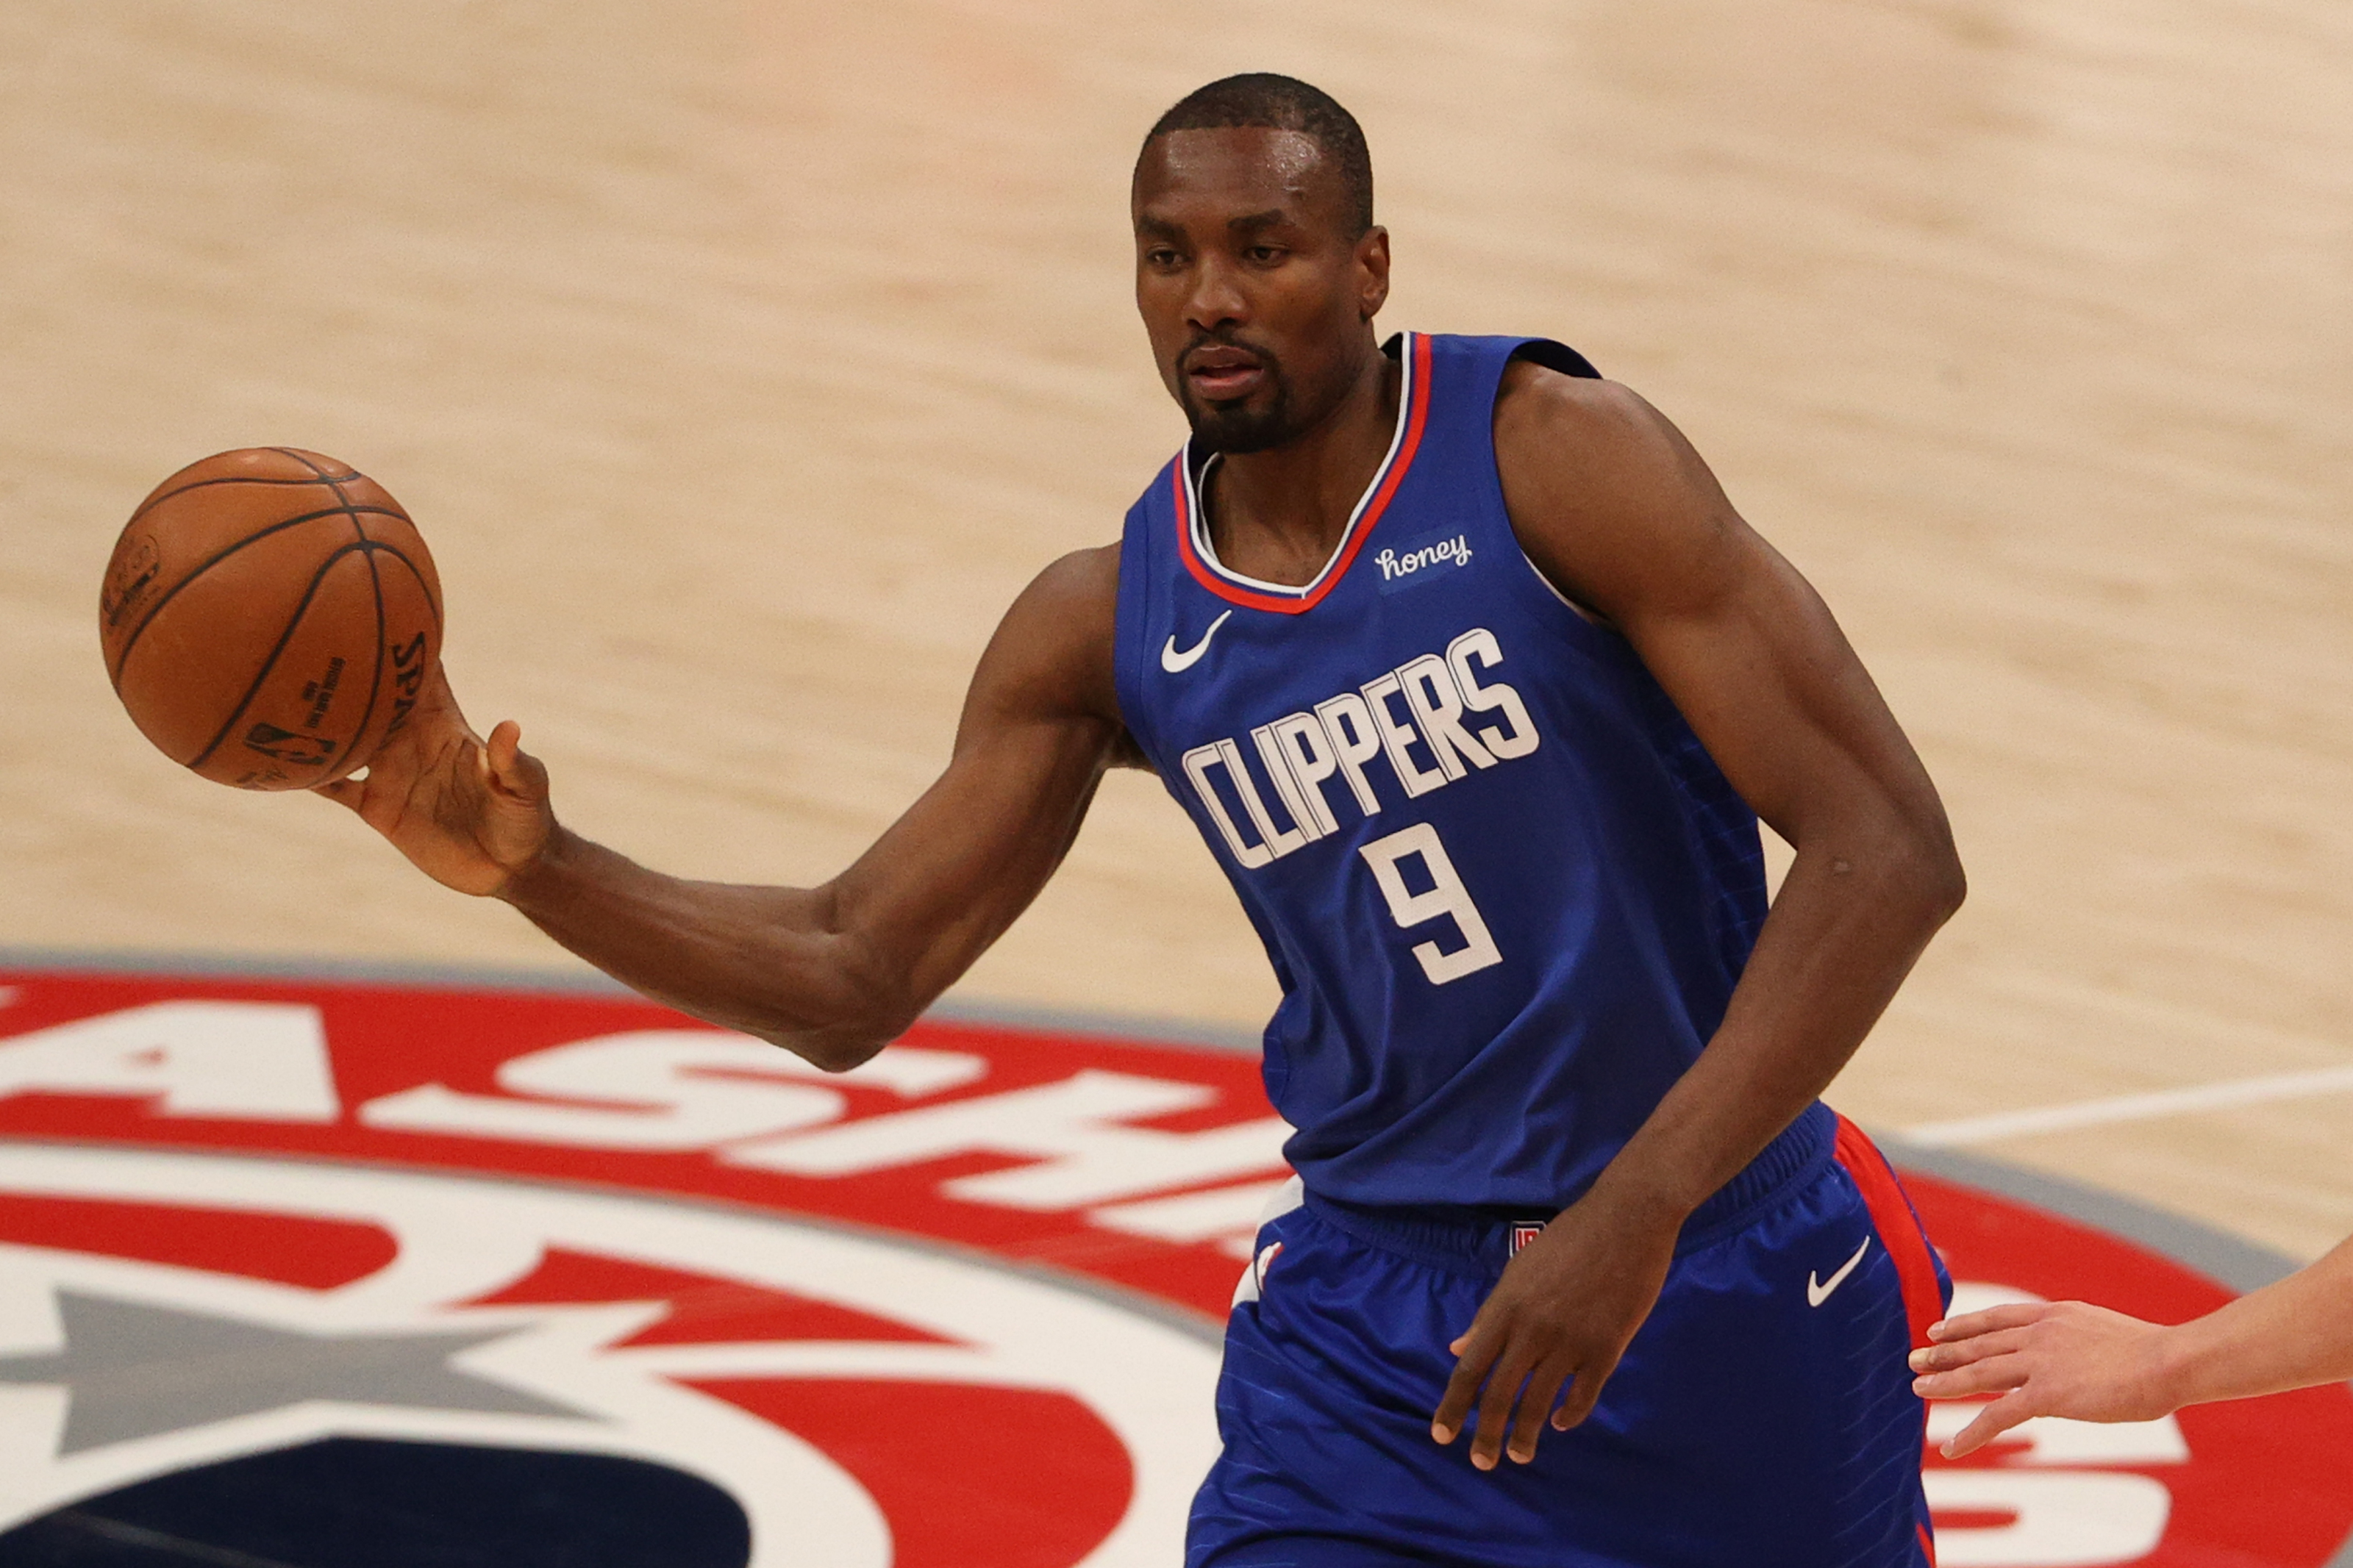 B/R Kicks - Serge Ibaka is heading to the Clippers to